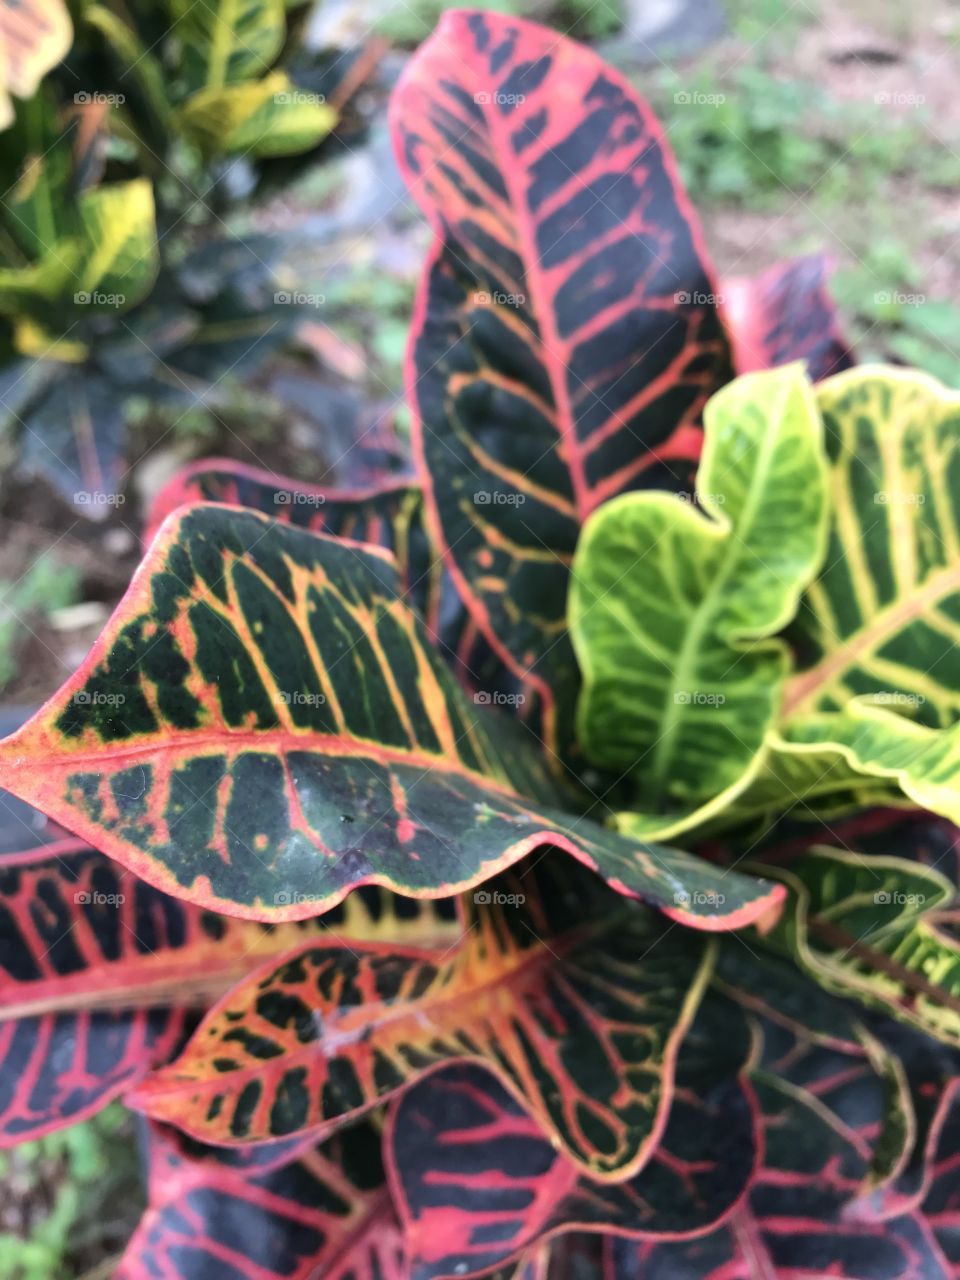 This crisp leafed plant showcases the beauty of nature featuring rainbow colours contrasted by the dark greens in this humble garden located in Honduras.